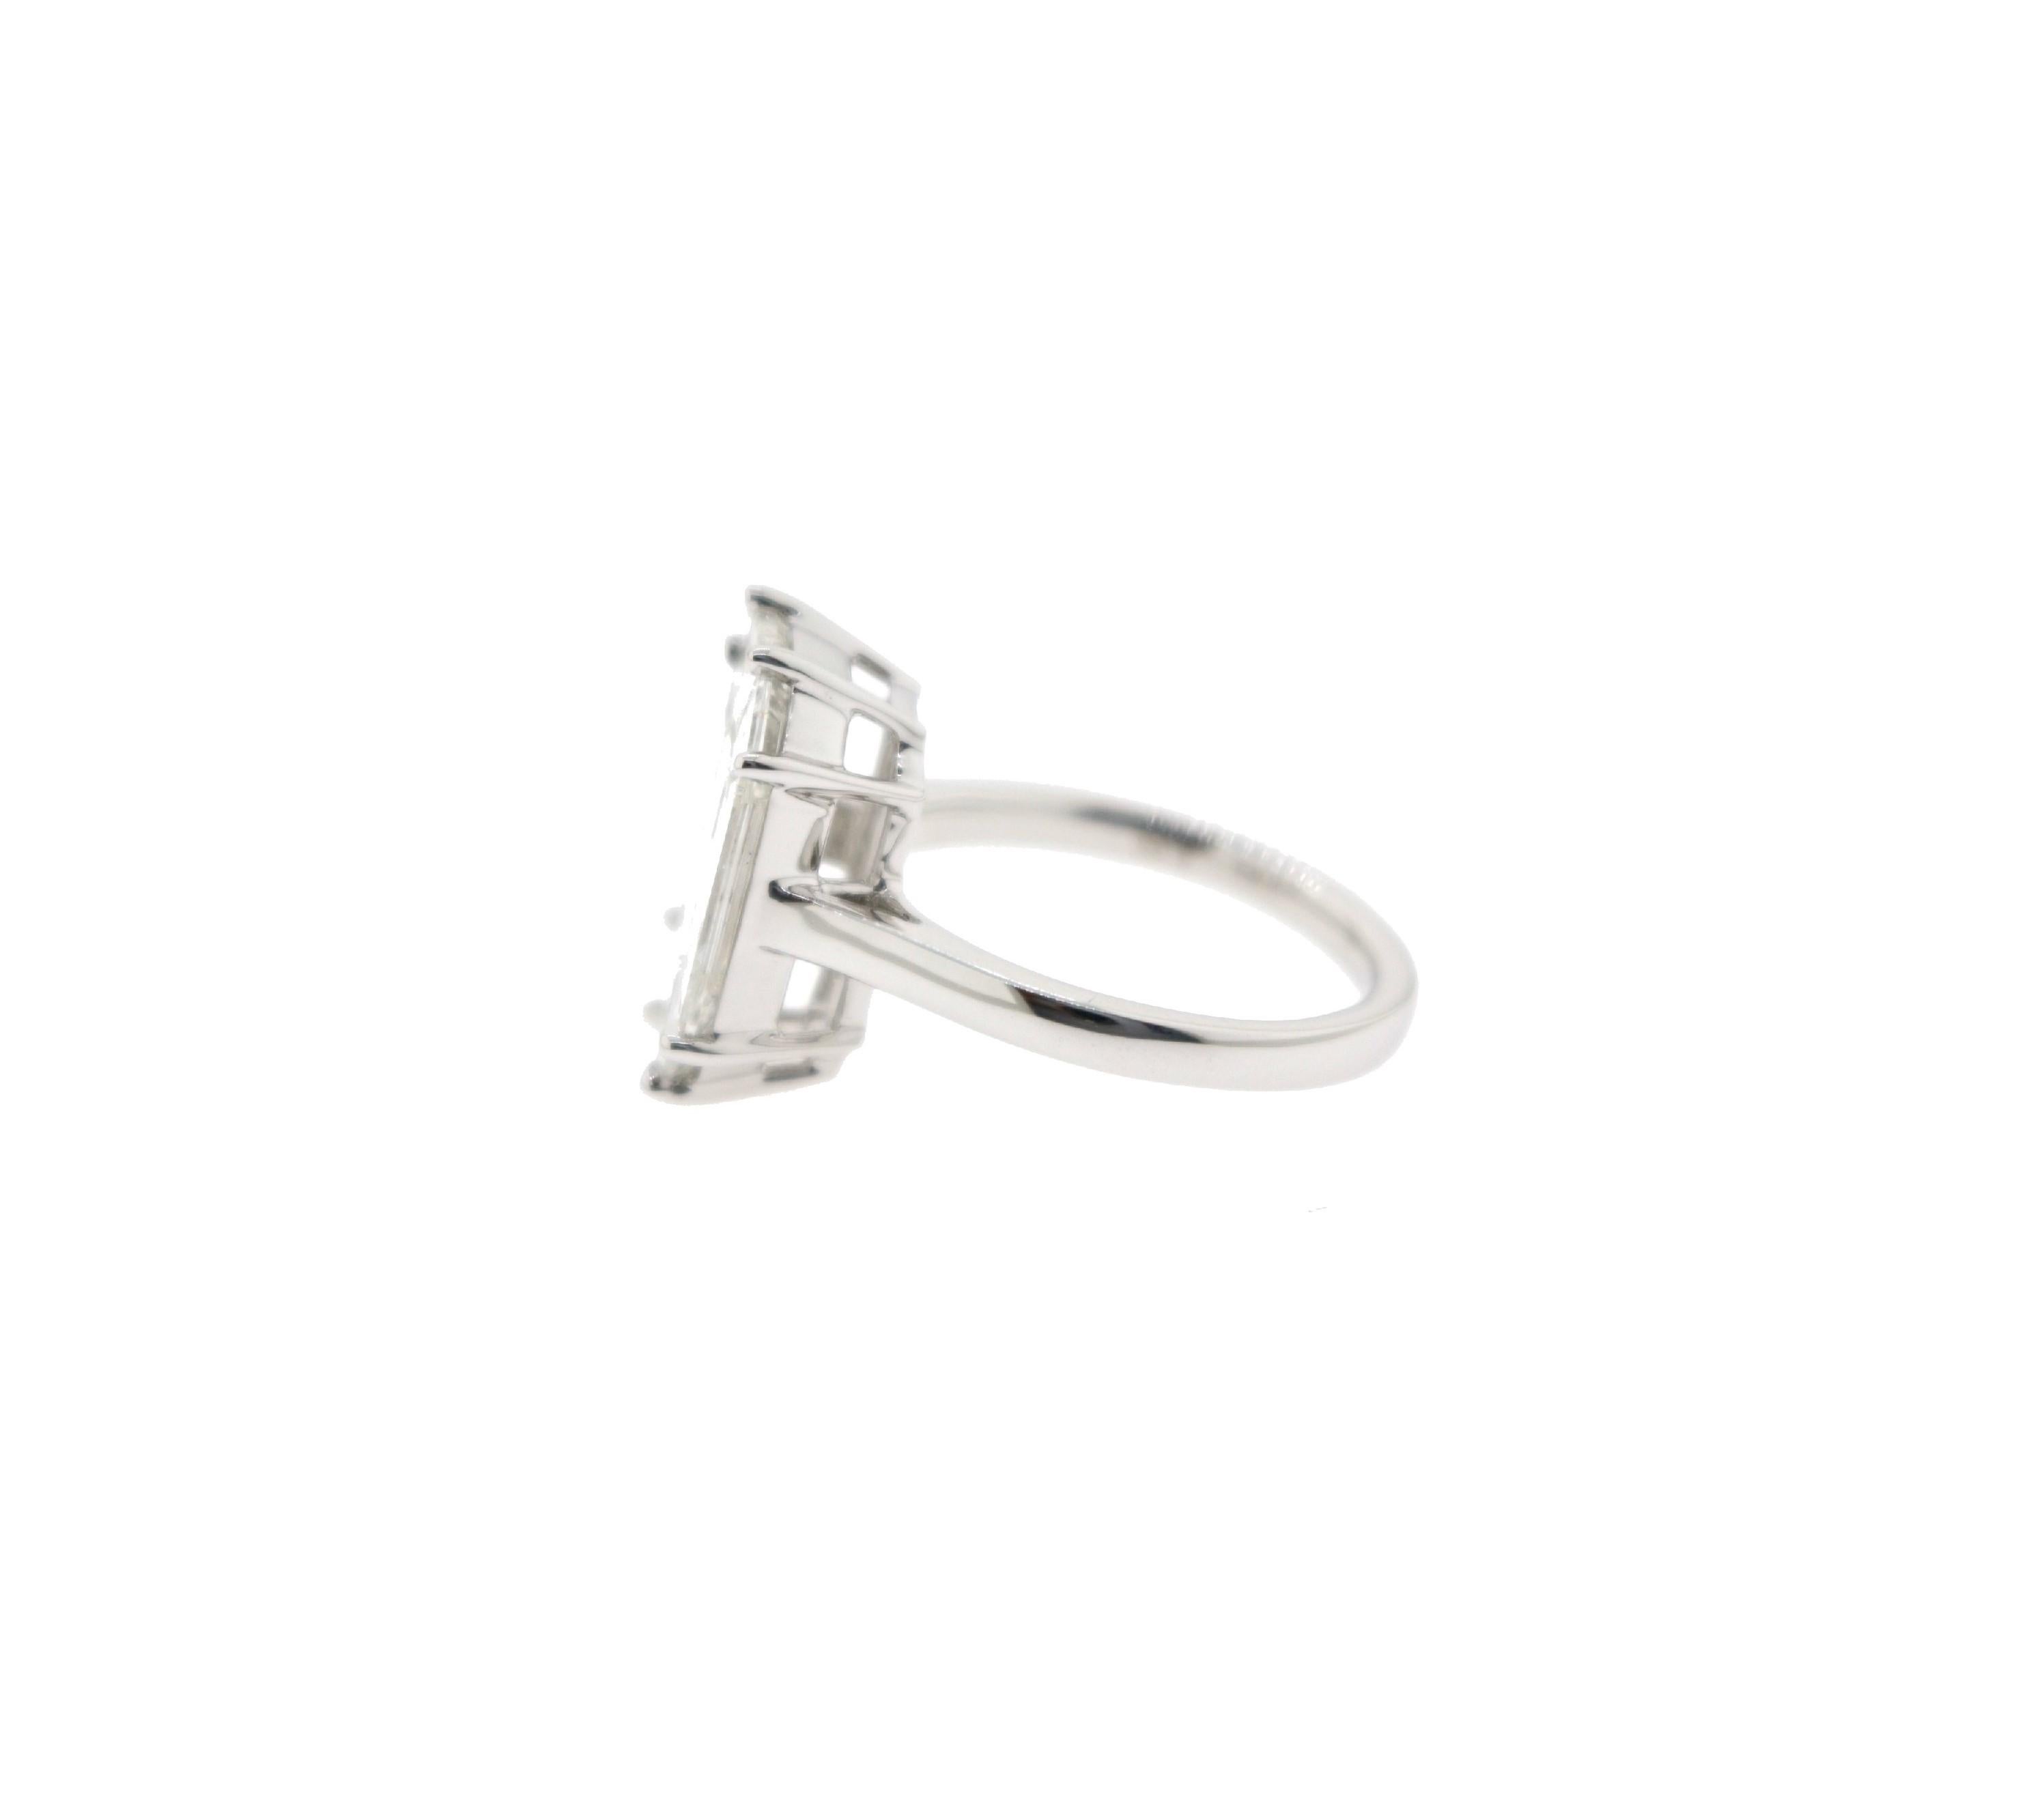 JR 3.33 Carat Emerald Cut Illusion Diamond Ring 18 Karat White Gold

Emerald, Baguette and Trapezoid shaped diamonds set in an illusion to create the look of a 9 carat single emerald cut stone. The ring is set in 18 Karat white gold. The color of